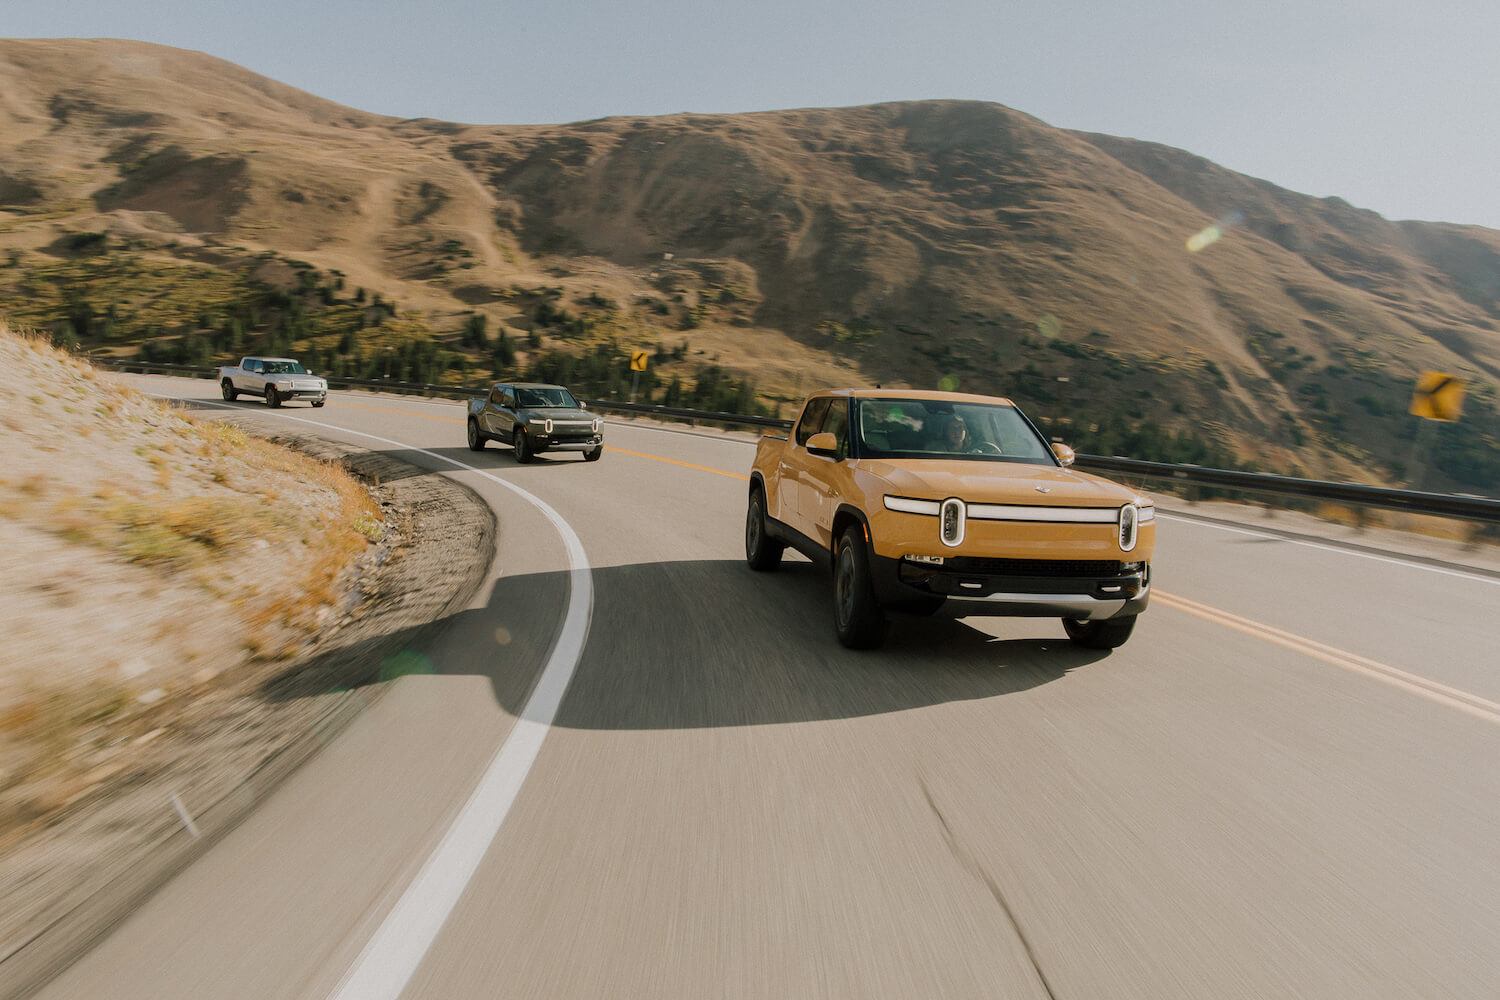 Three Rivian R1T electric trucks convoy over a paved mountain pass, bare ridgelines visible in the background.